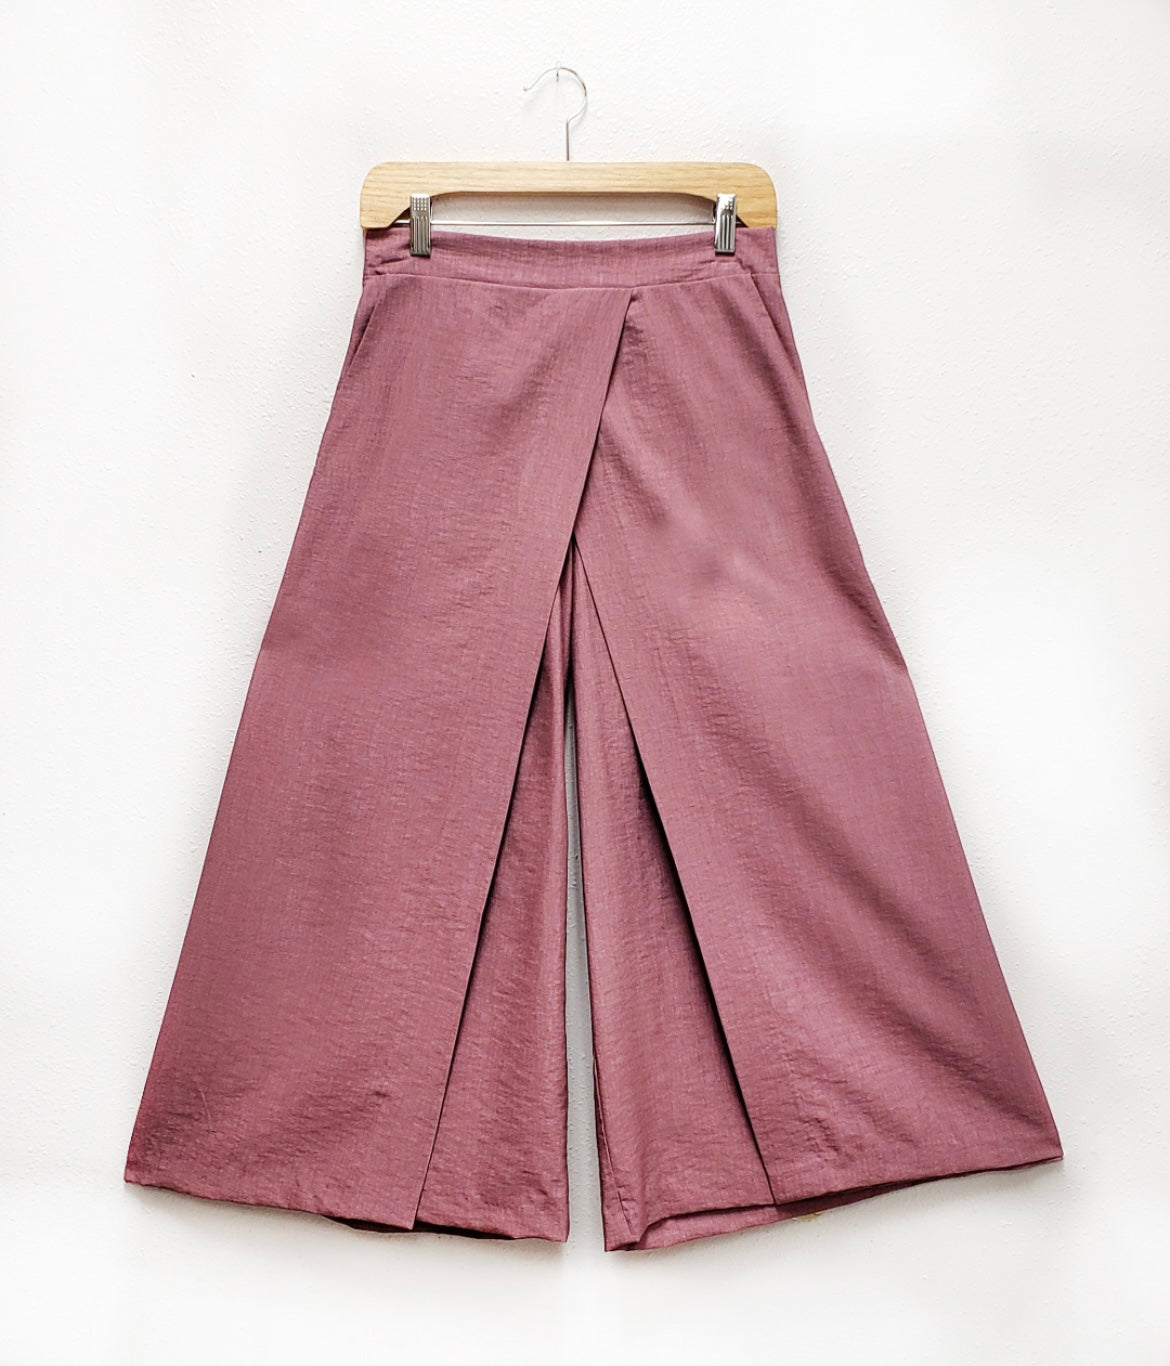 close up of mauve pant with flat front and skirt-like panels in the front. on a wooden hanger on a white background.